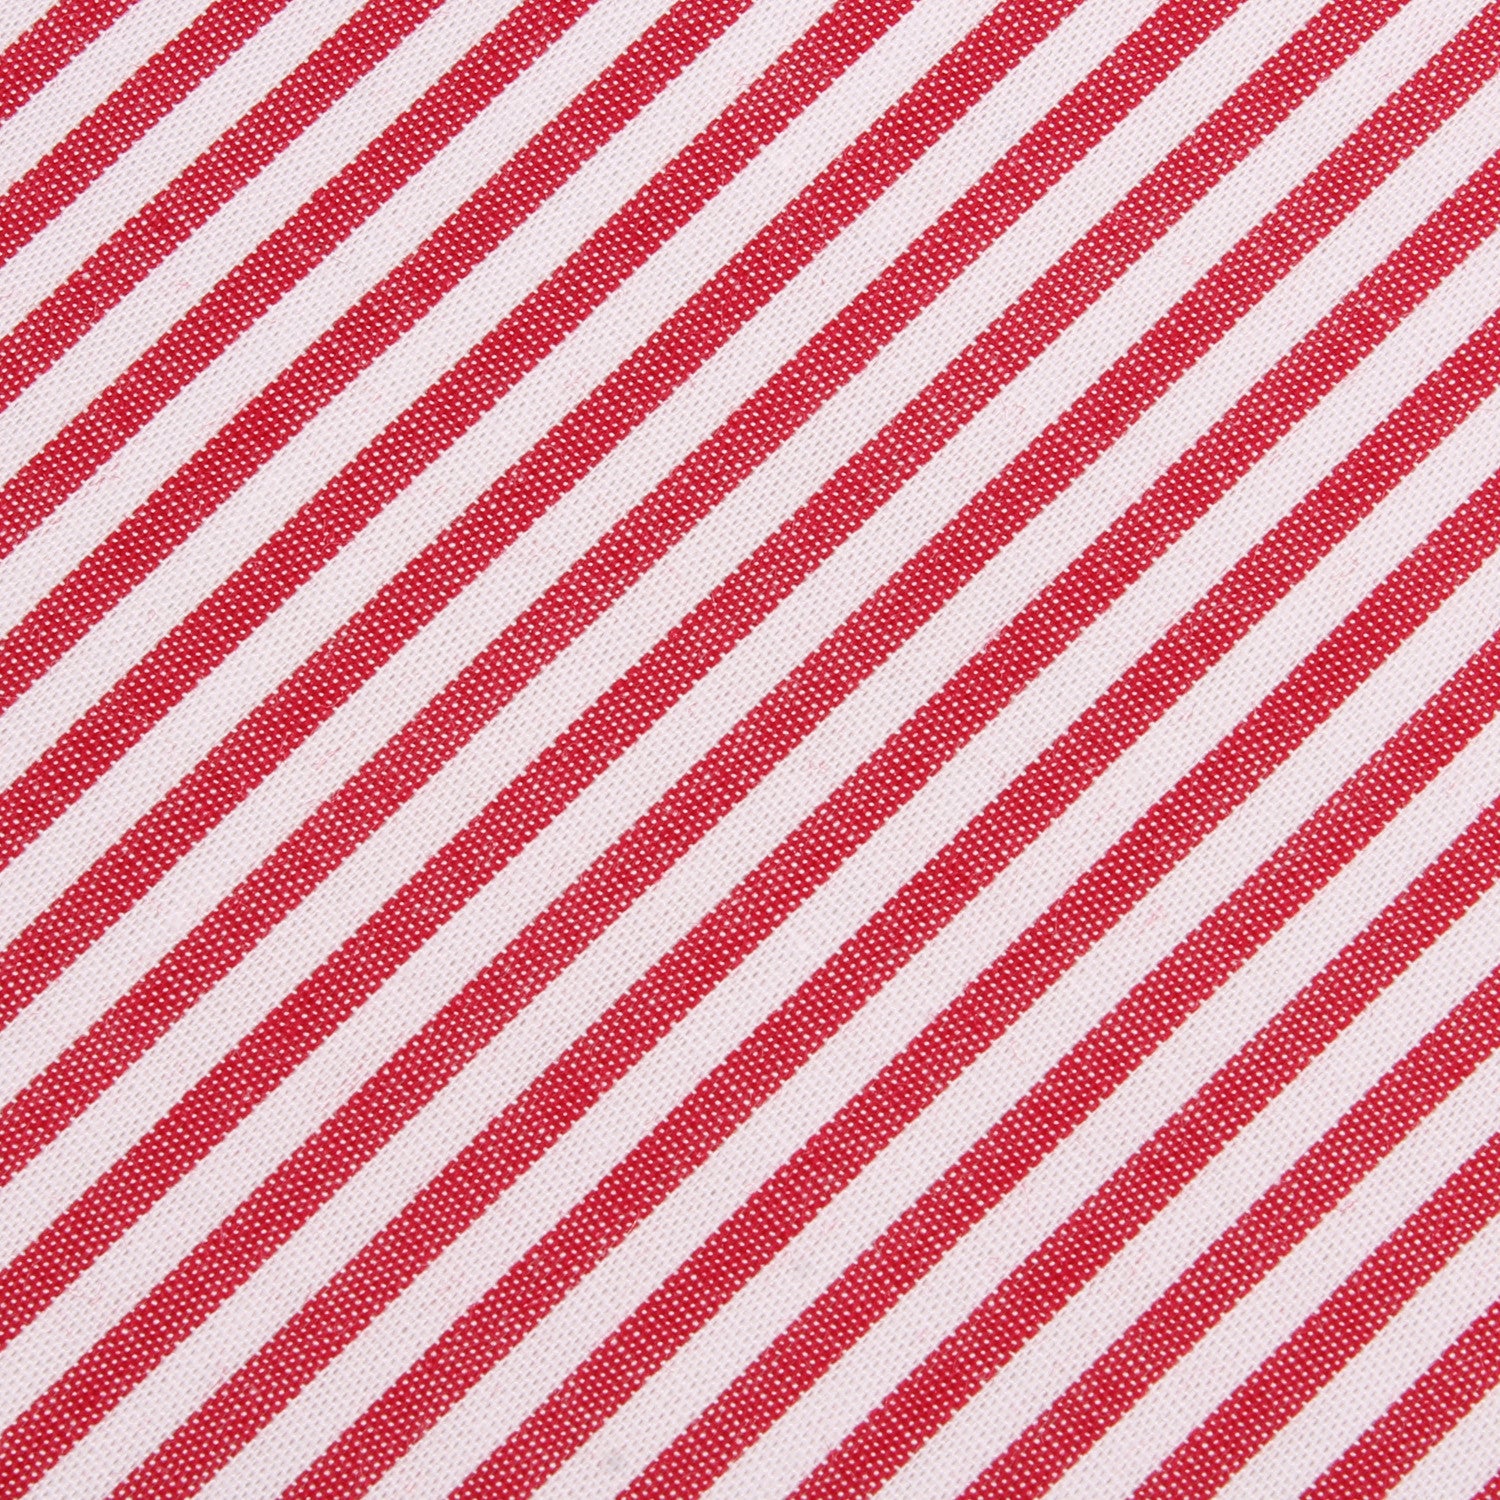 Red and White Chalk Stripe Cotton Skinny Tie Fabric